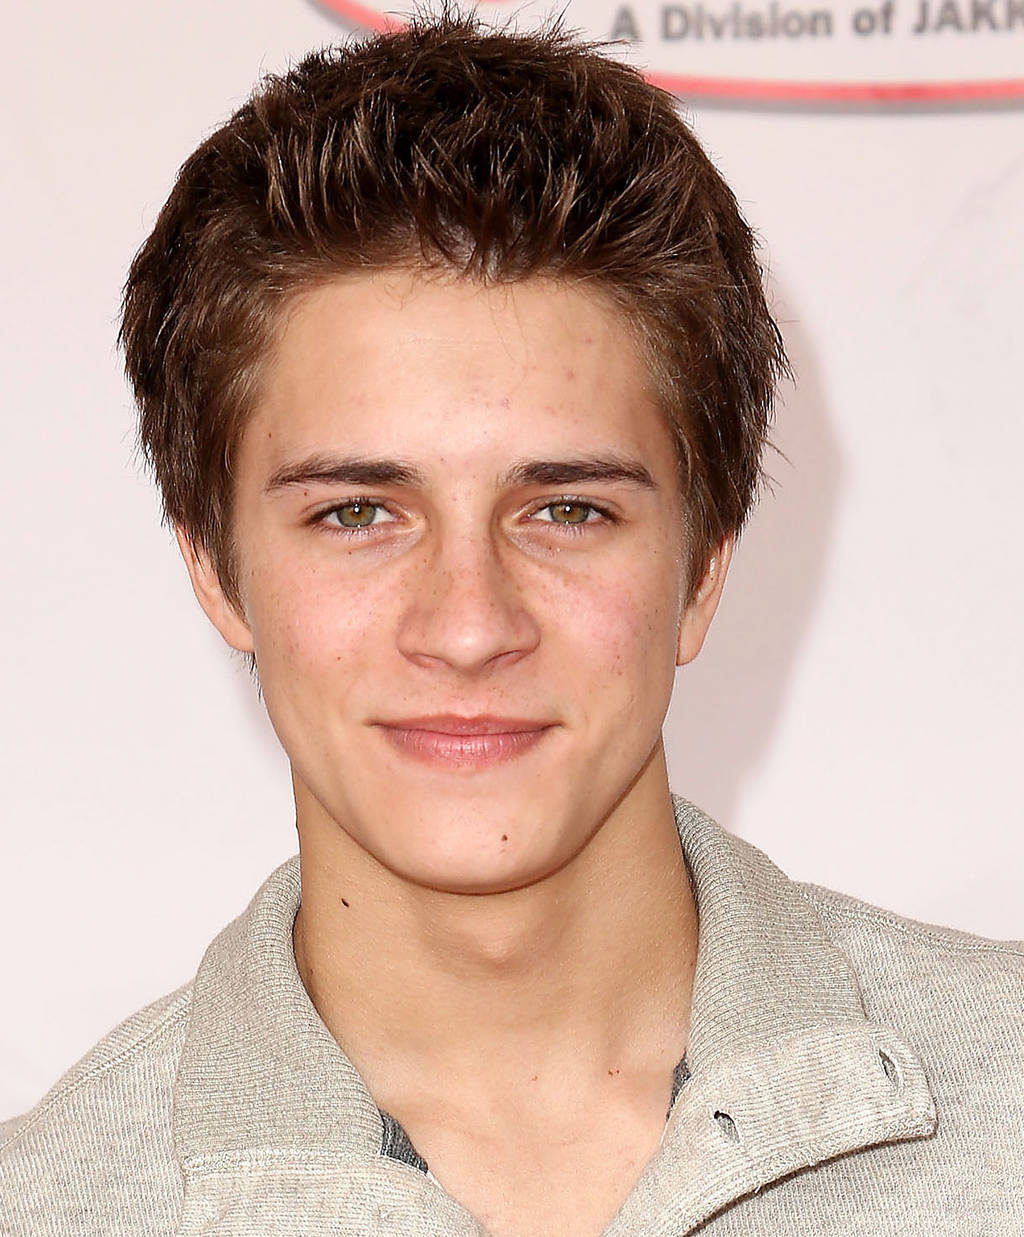 Actor Billy Unger - age: 27